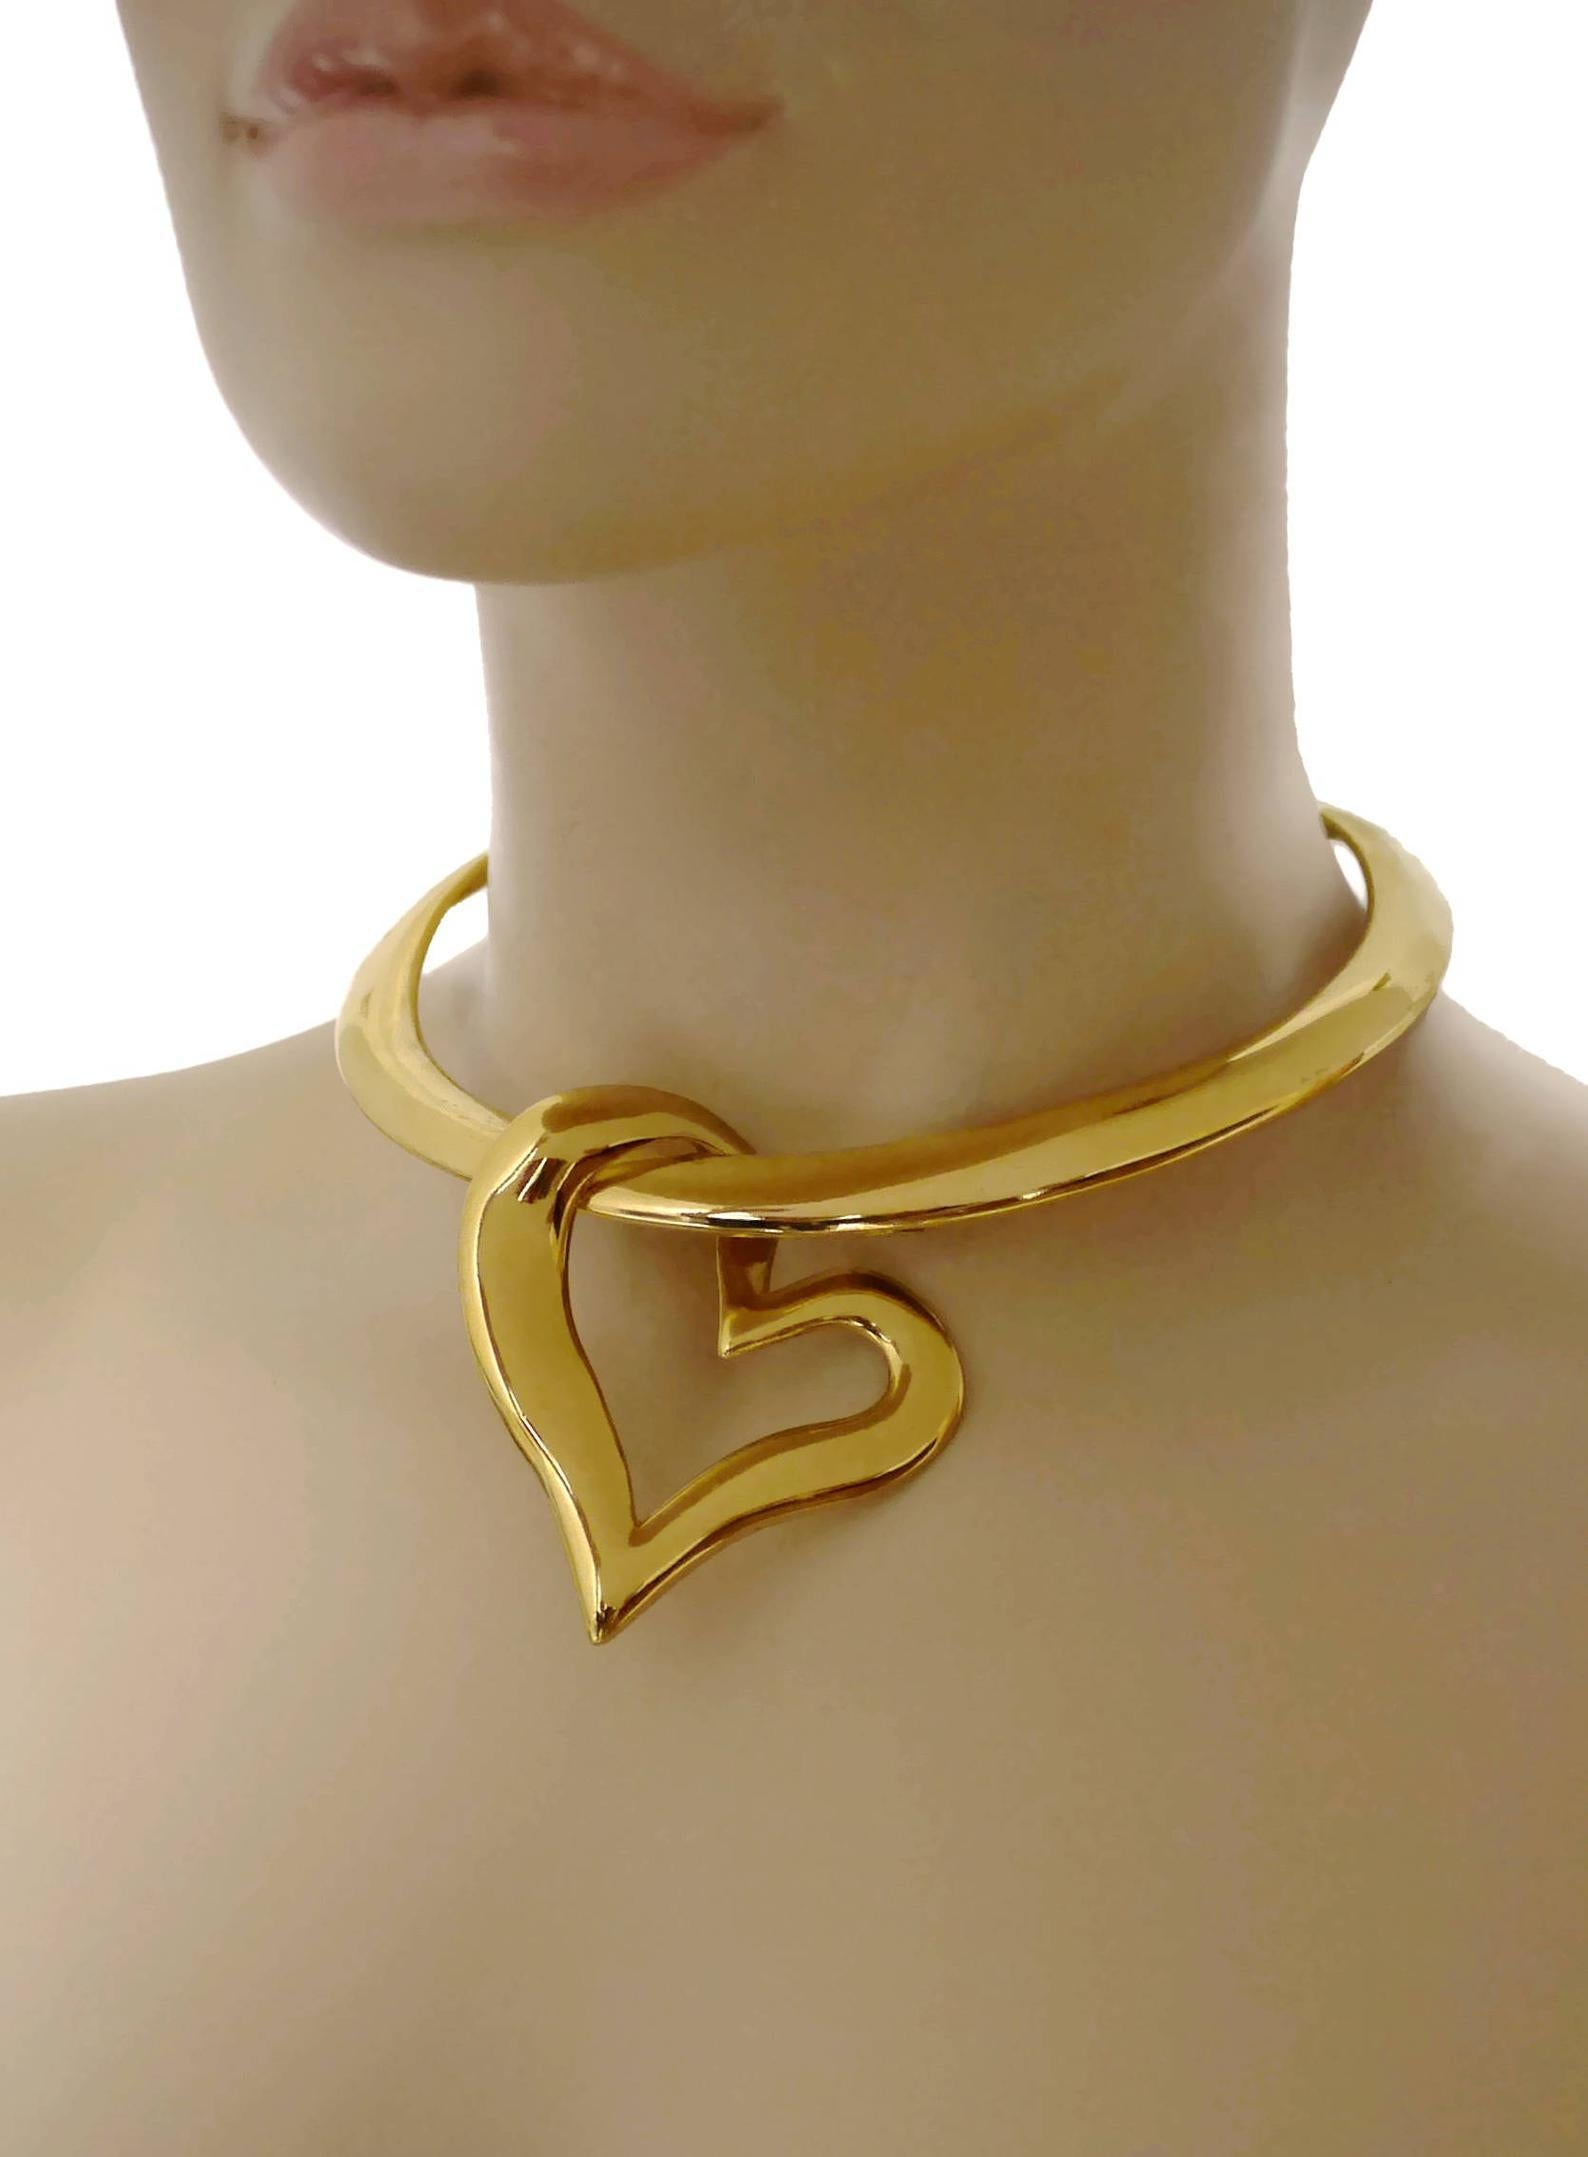 Vintage YSL Yves Saint Laurent Heart Pendant Rigid Choker Necklace

Measurements:
Height: 4 inches (10 cm)
Width: 2.5 inches (6.3 cm)
Diameter: 10.23 inches (26 cm)

Features:
- 100% Authentic YVES SAINT LAURENT.
- Massive heart pendant on a rigid